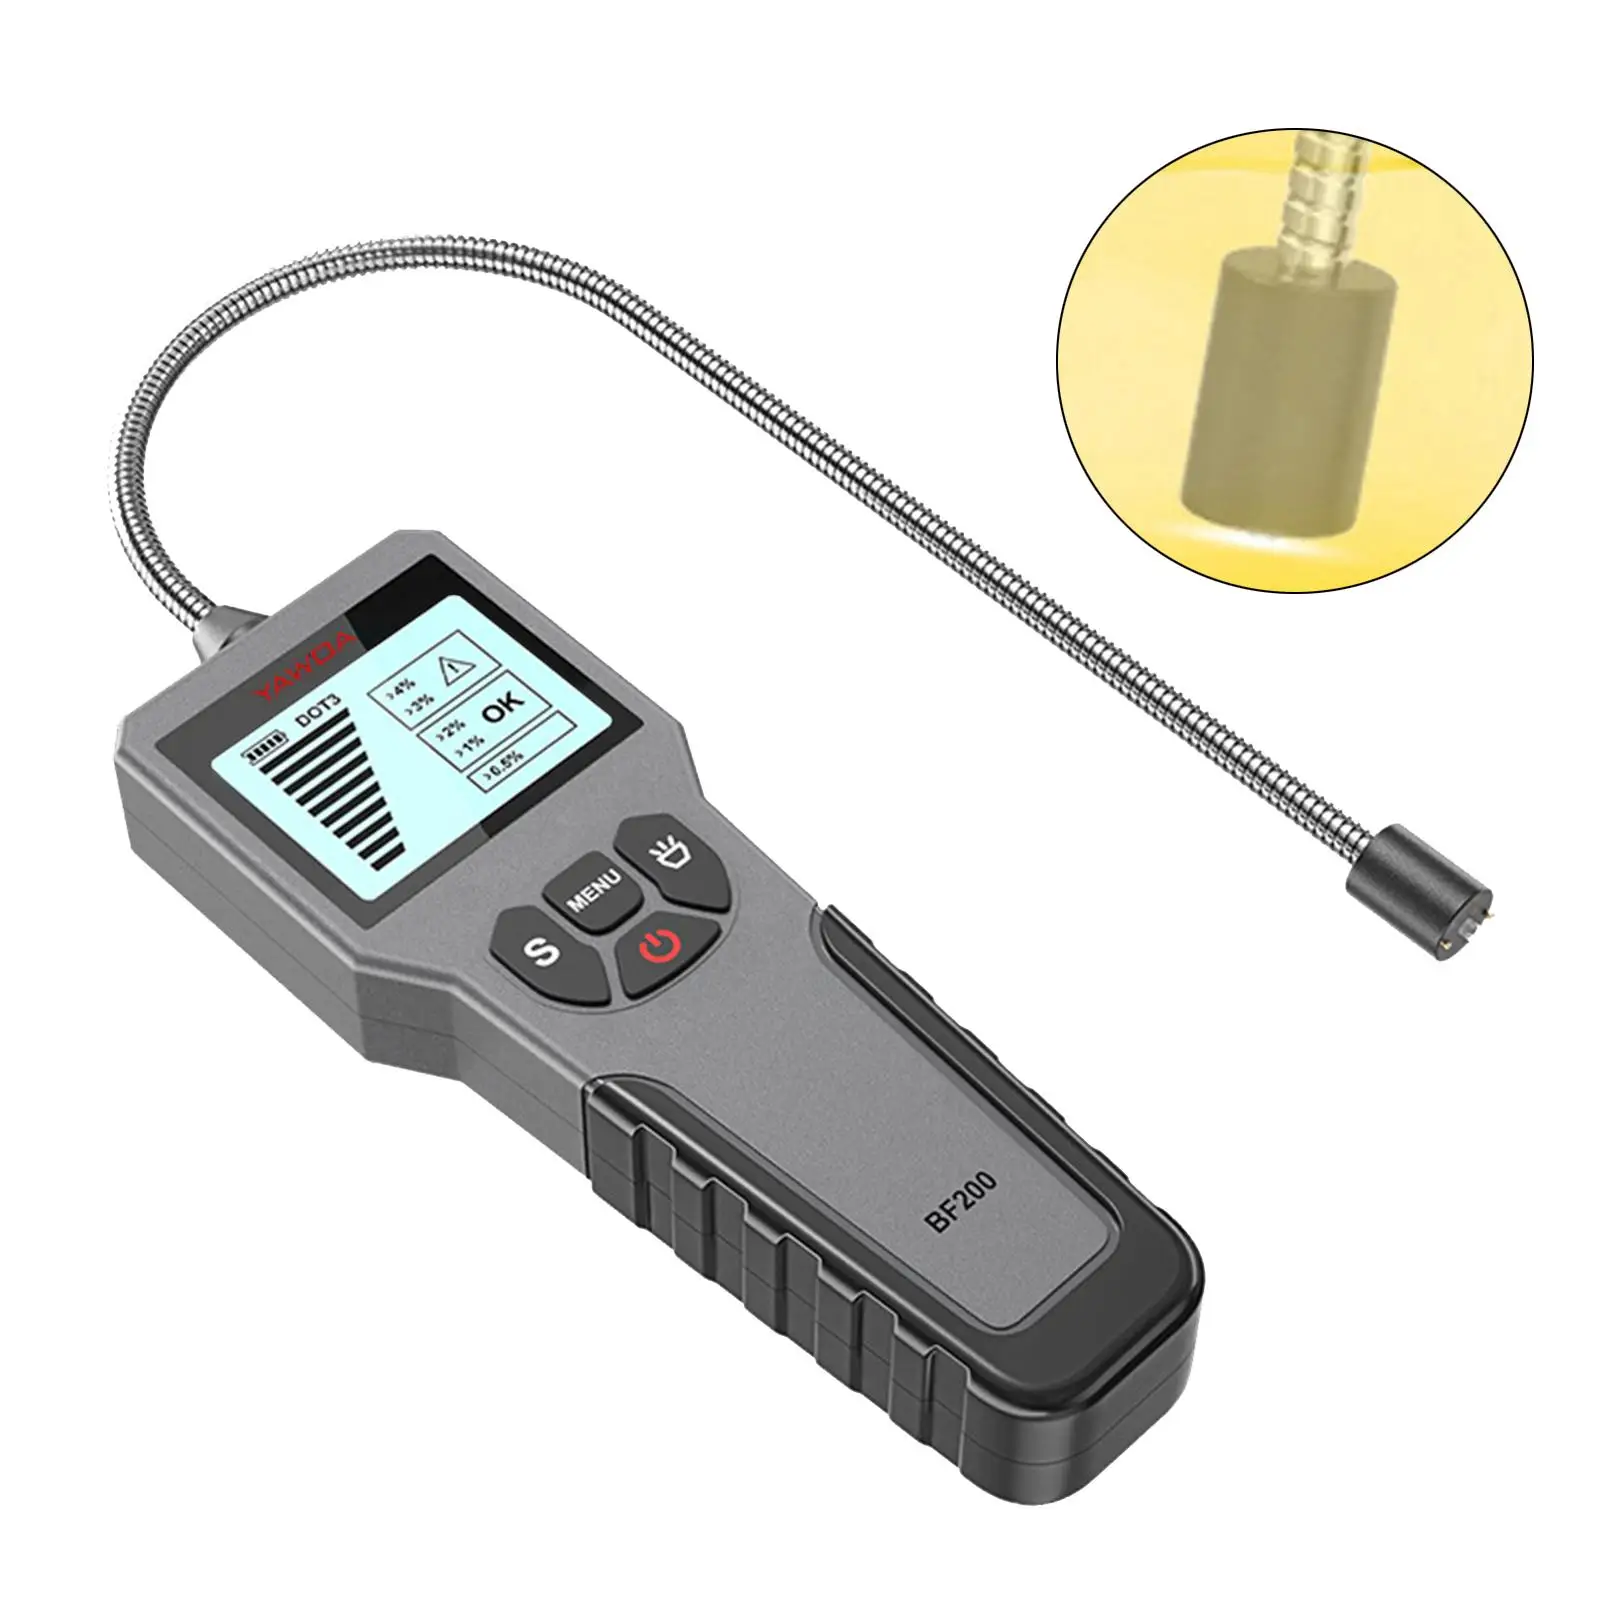 Car Brake Fluid Tester Car Brake Oil Water Content Portable Professional Sturdy Convenient High Precision for Car Motorbike